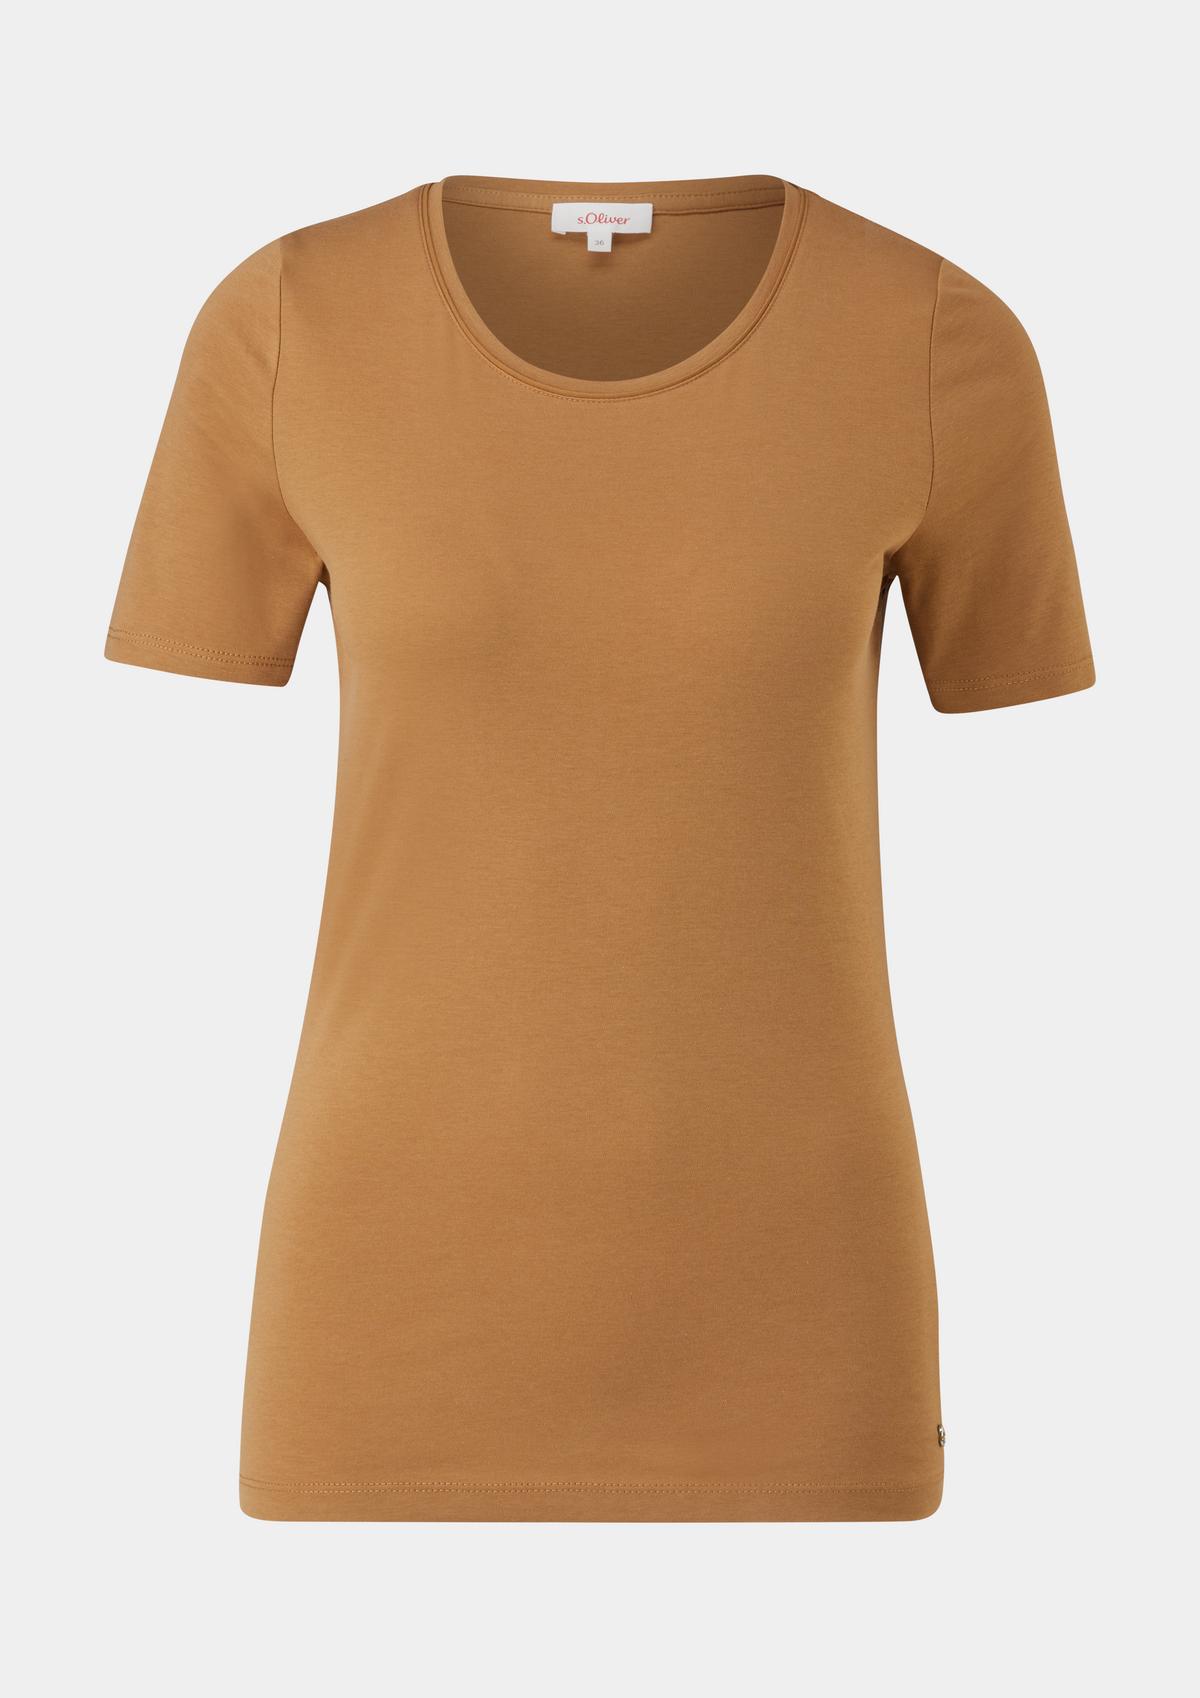 s.Oliver Jersey top in a plain colour